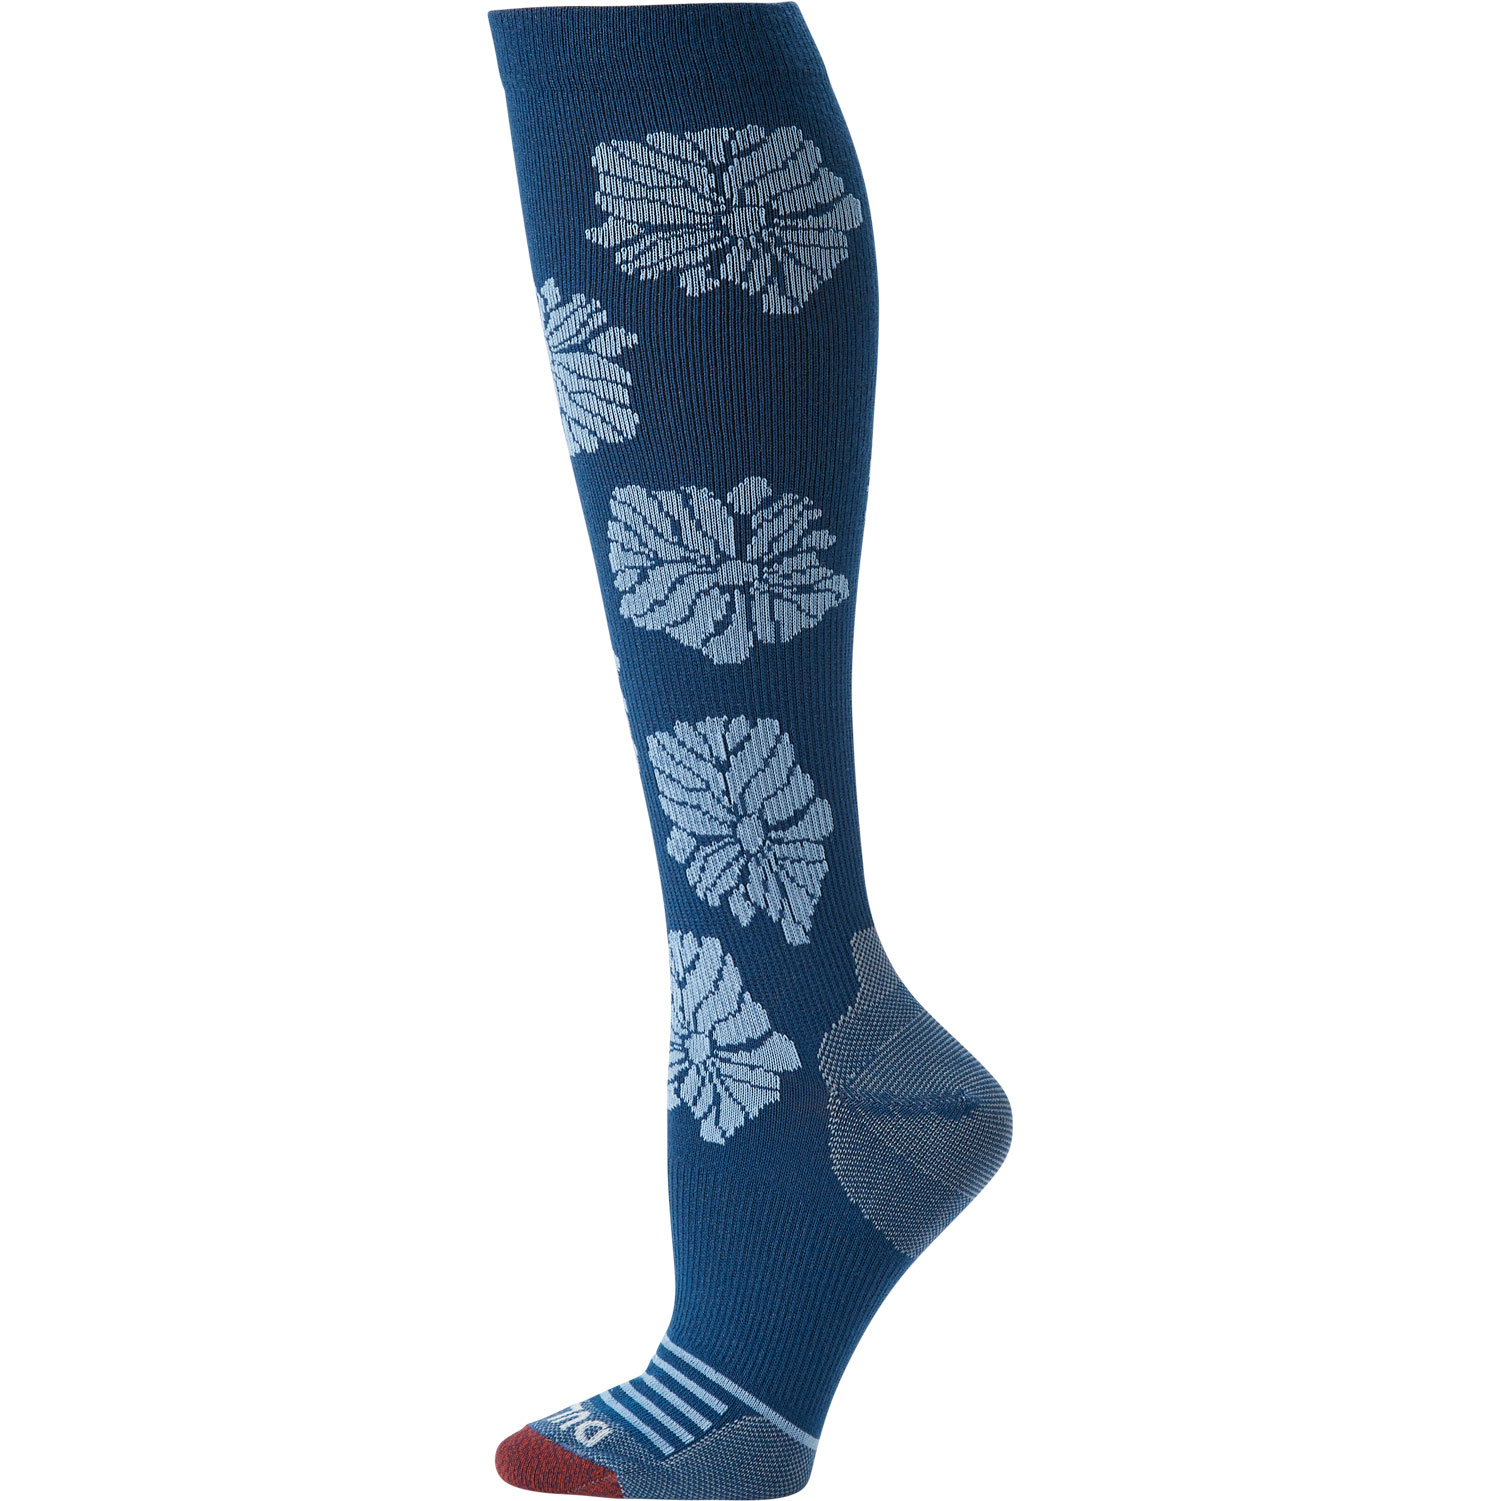 Women's Stay-Put Lightweight Compression Sock | Duluth Trading Company